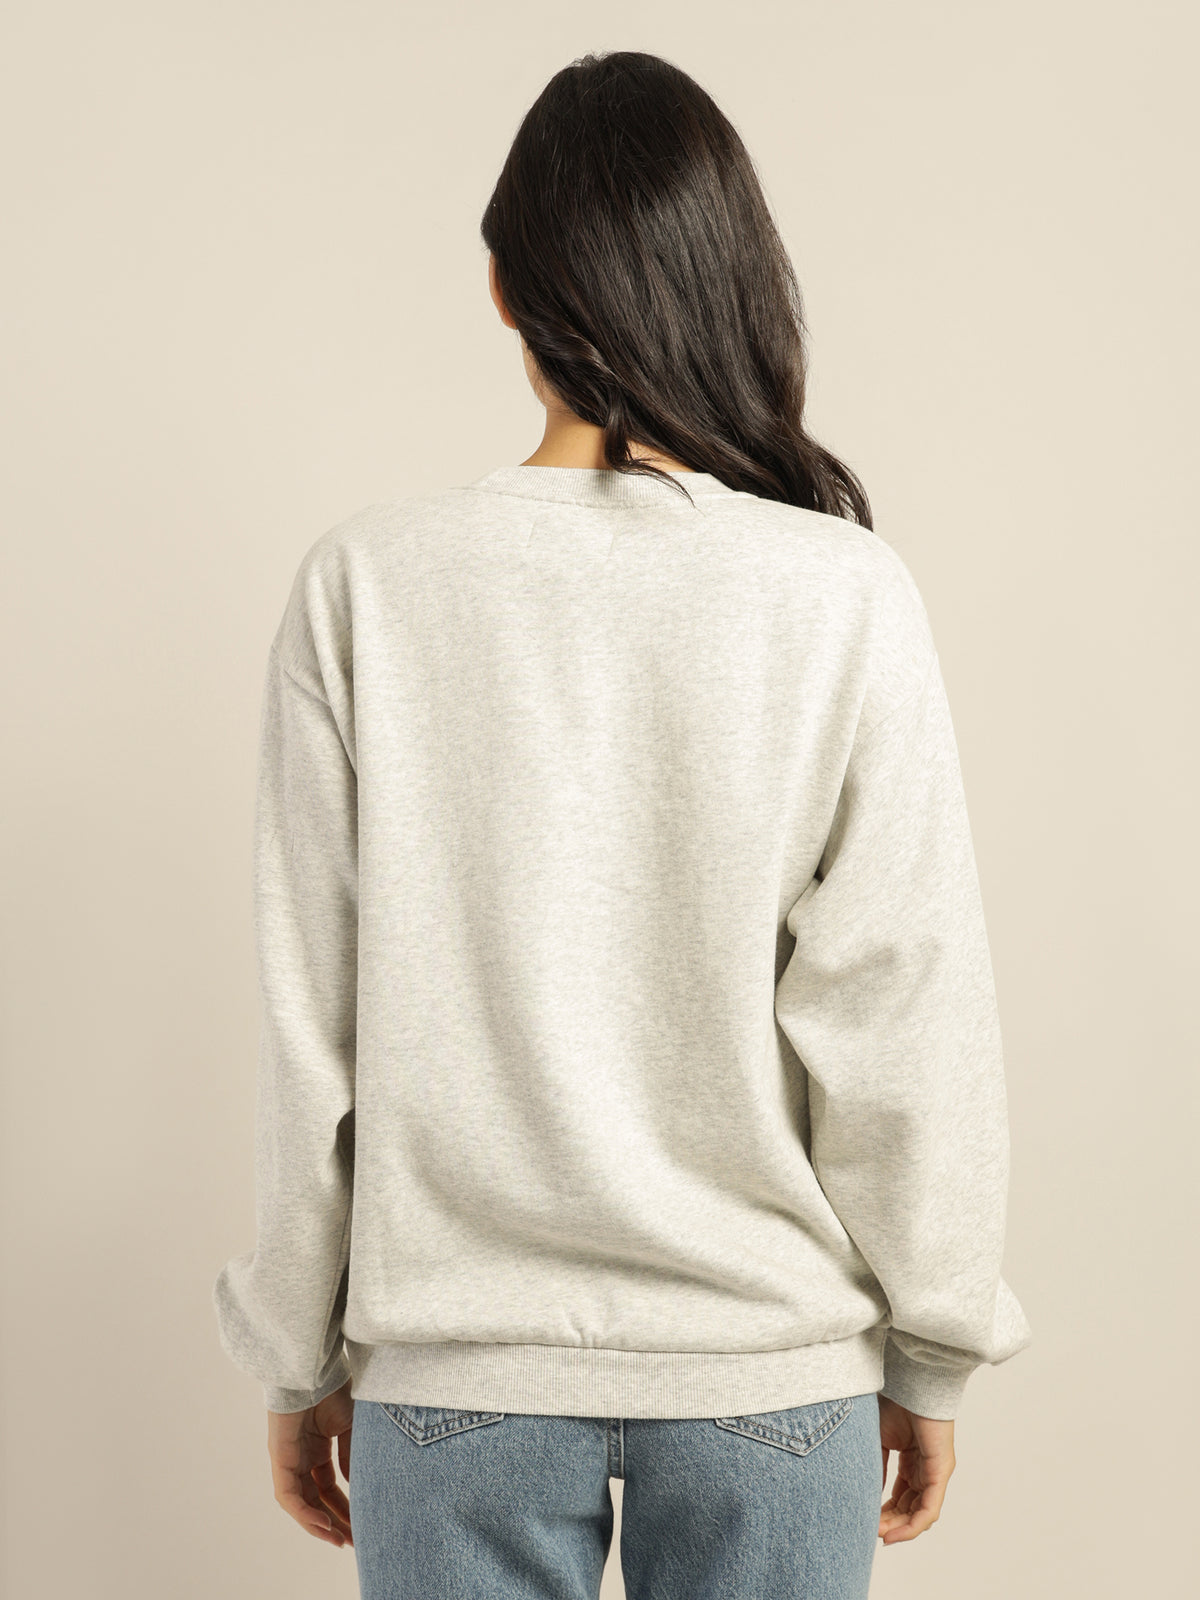 The Reaction Sweater in Light Grey Marle